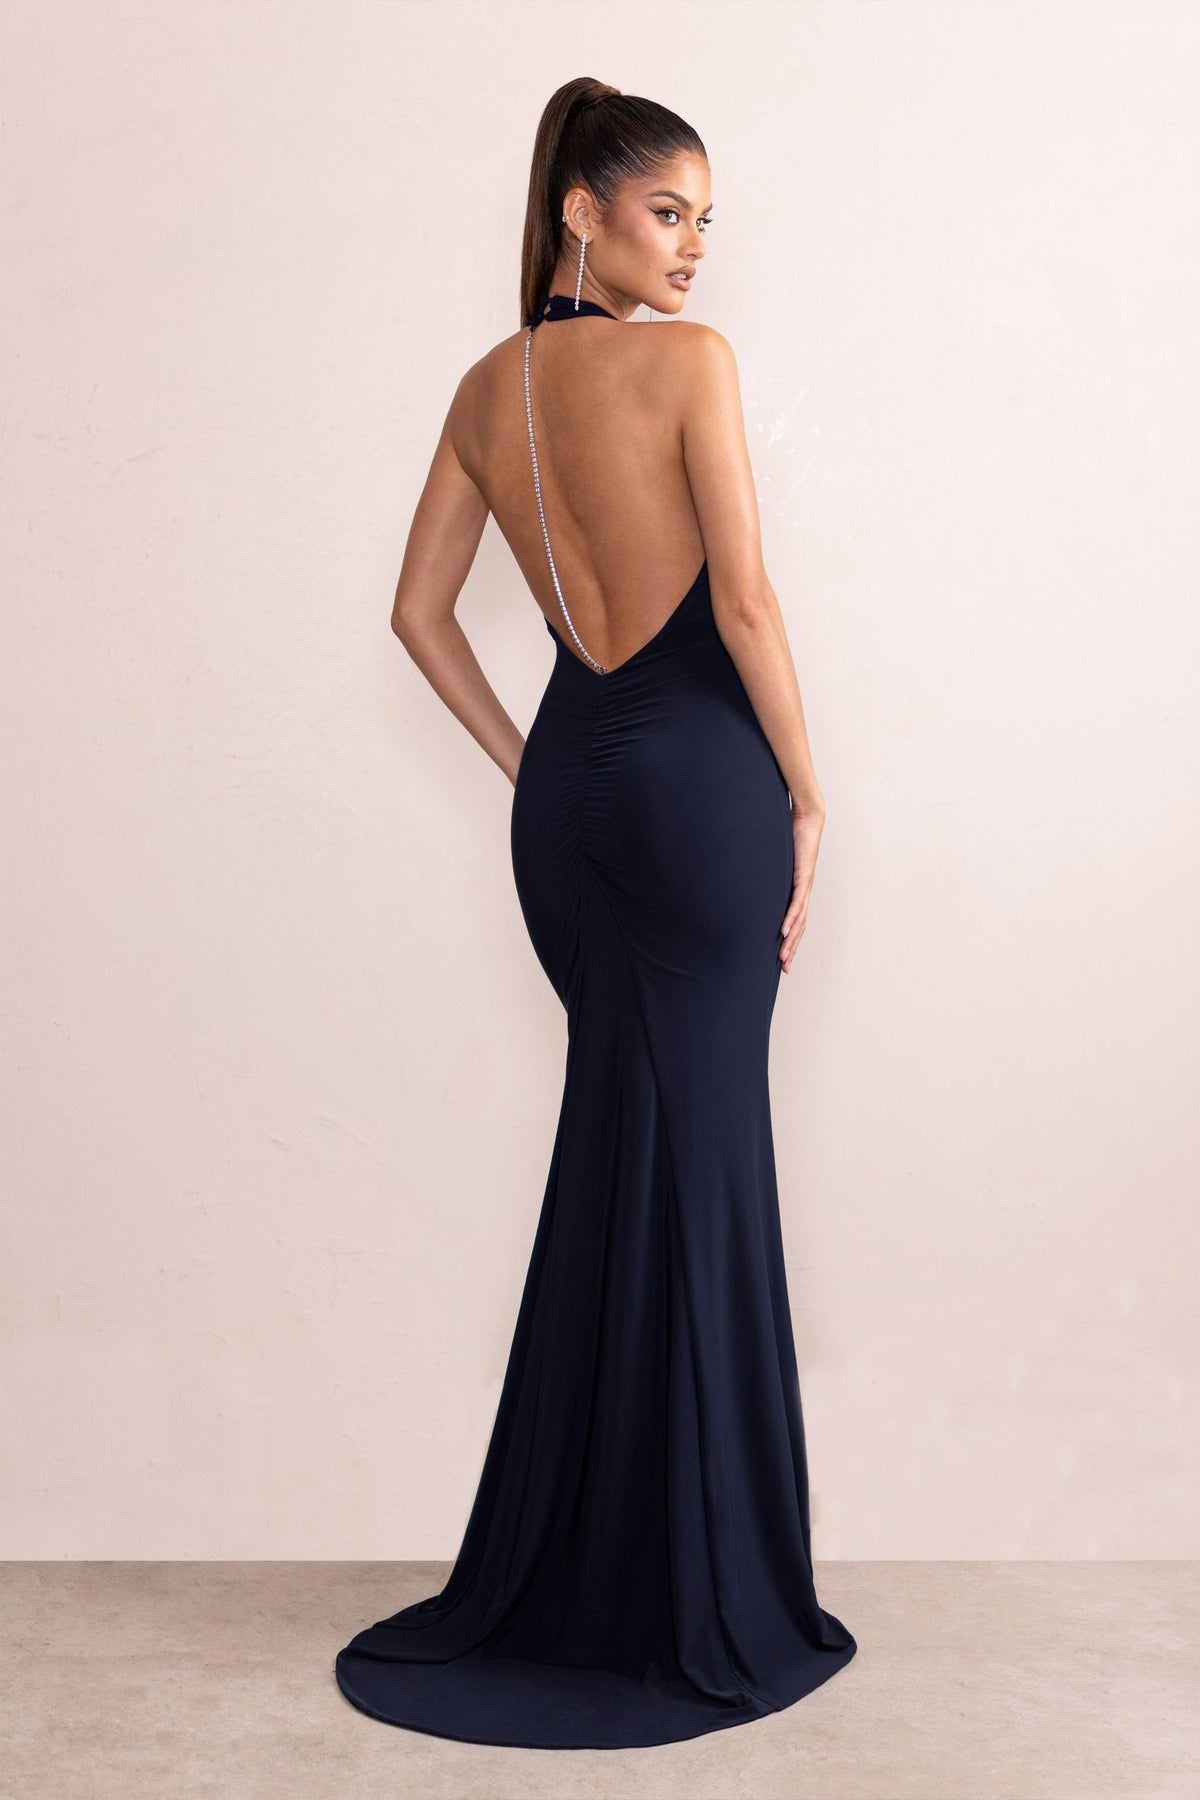 Shop deep v-neck brown satin mermaid long formal dress with open back from  Hocogirl.com